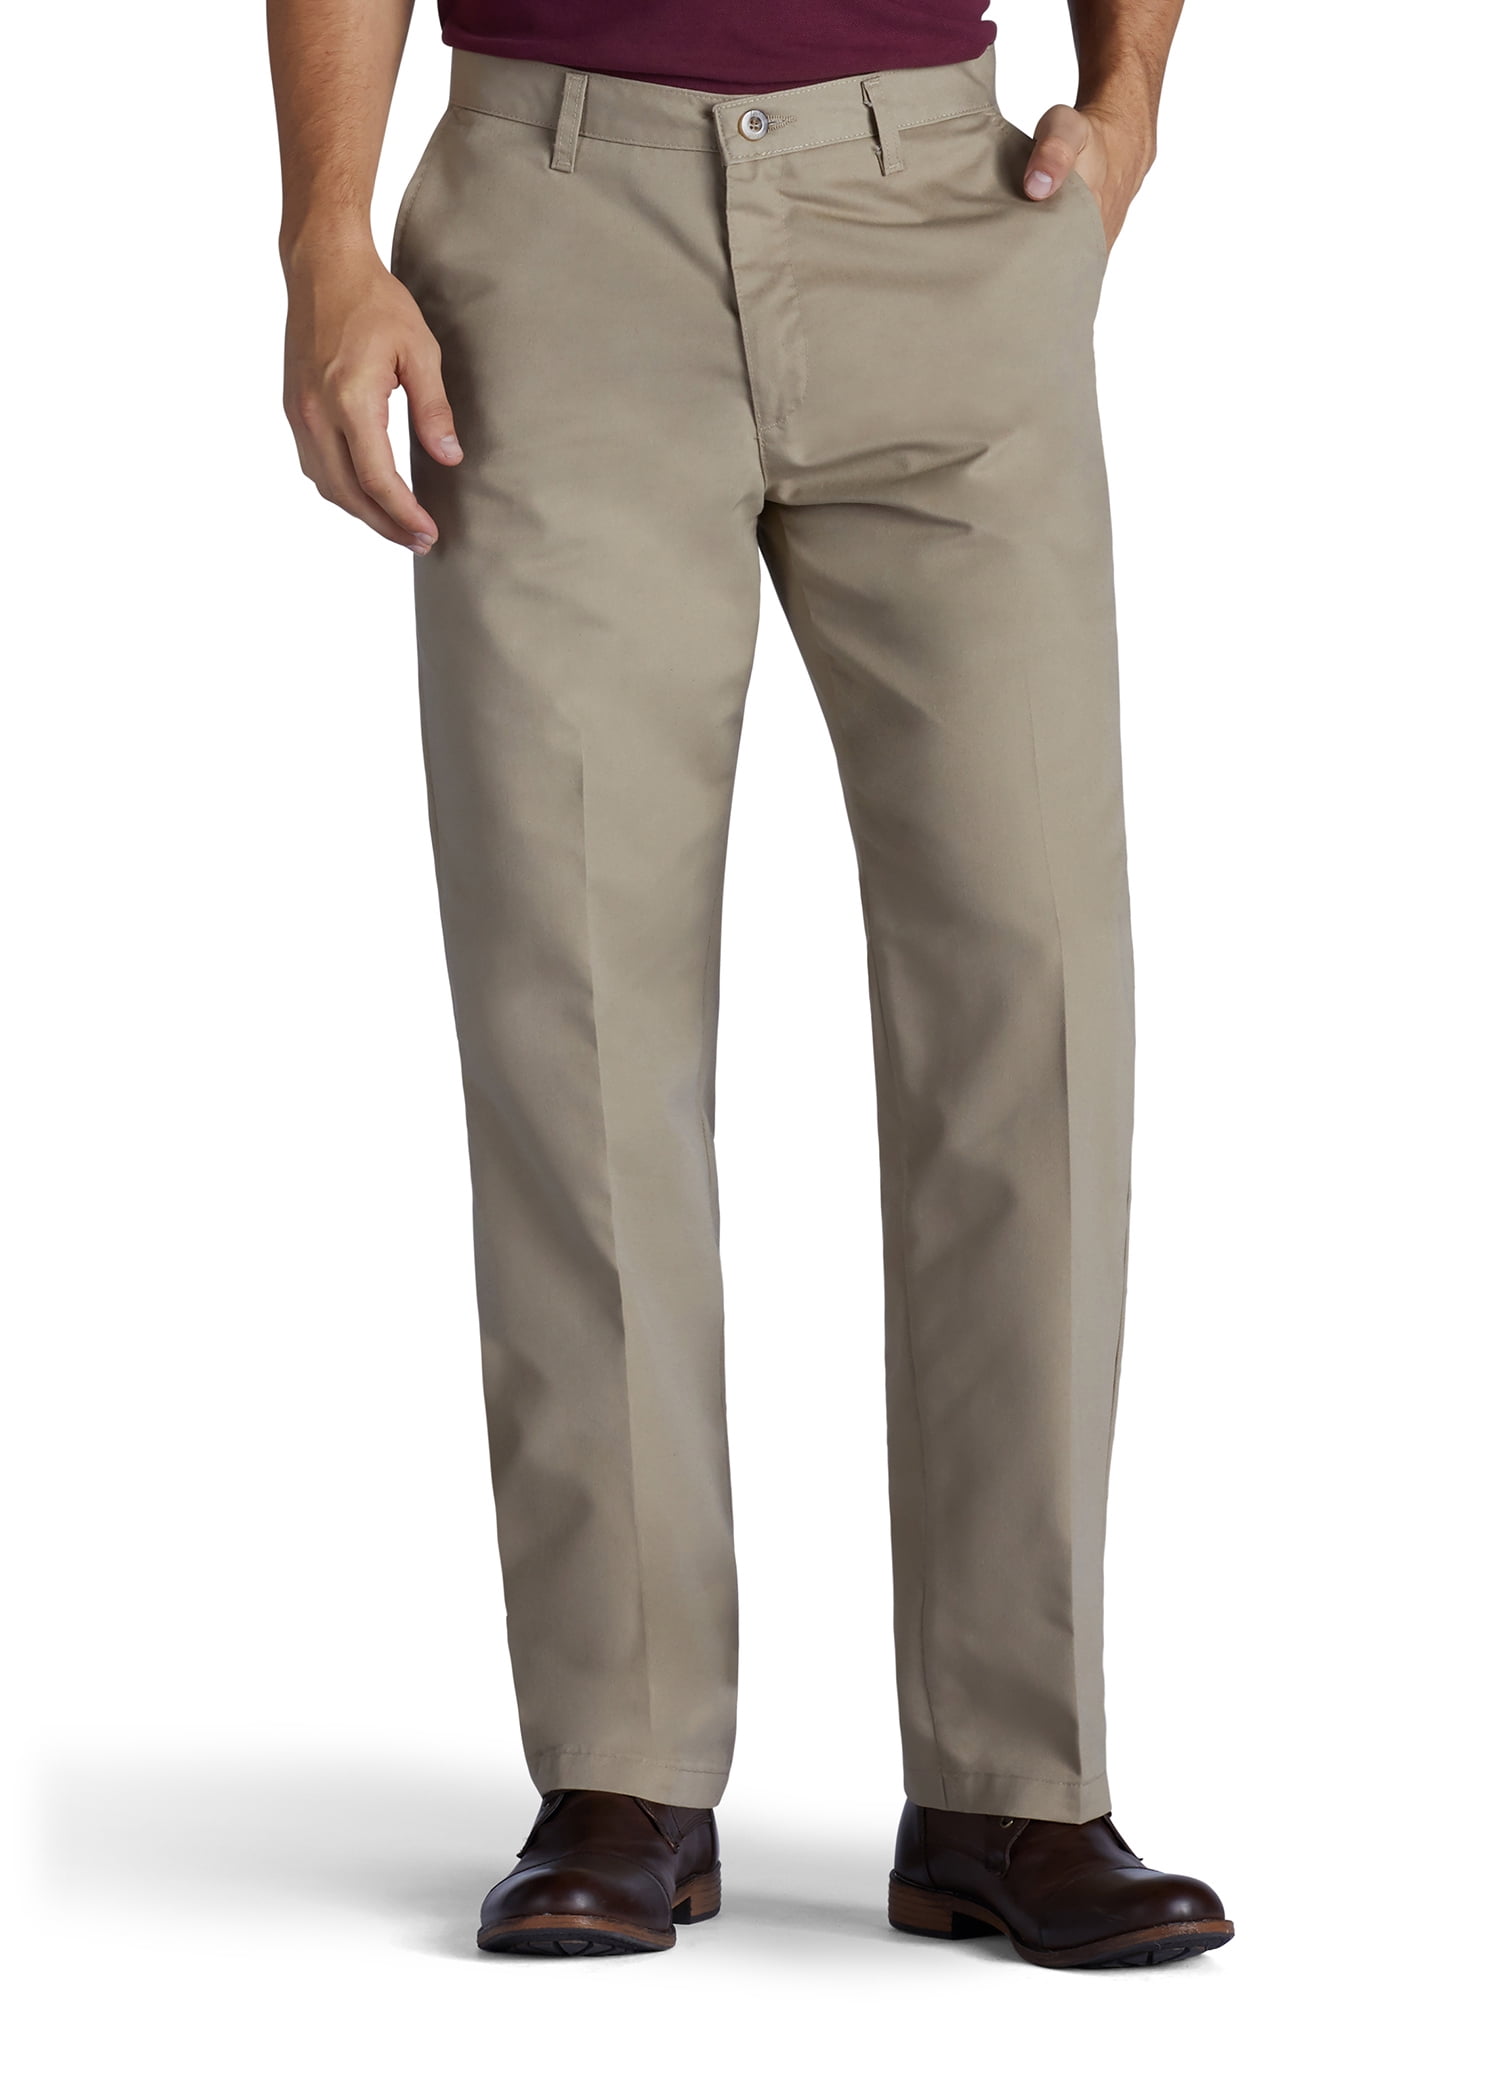 Lee Carefree Stretch Straight Fit Pebble Flat Front Performance Series Pants 